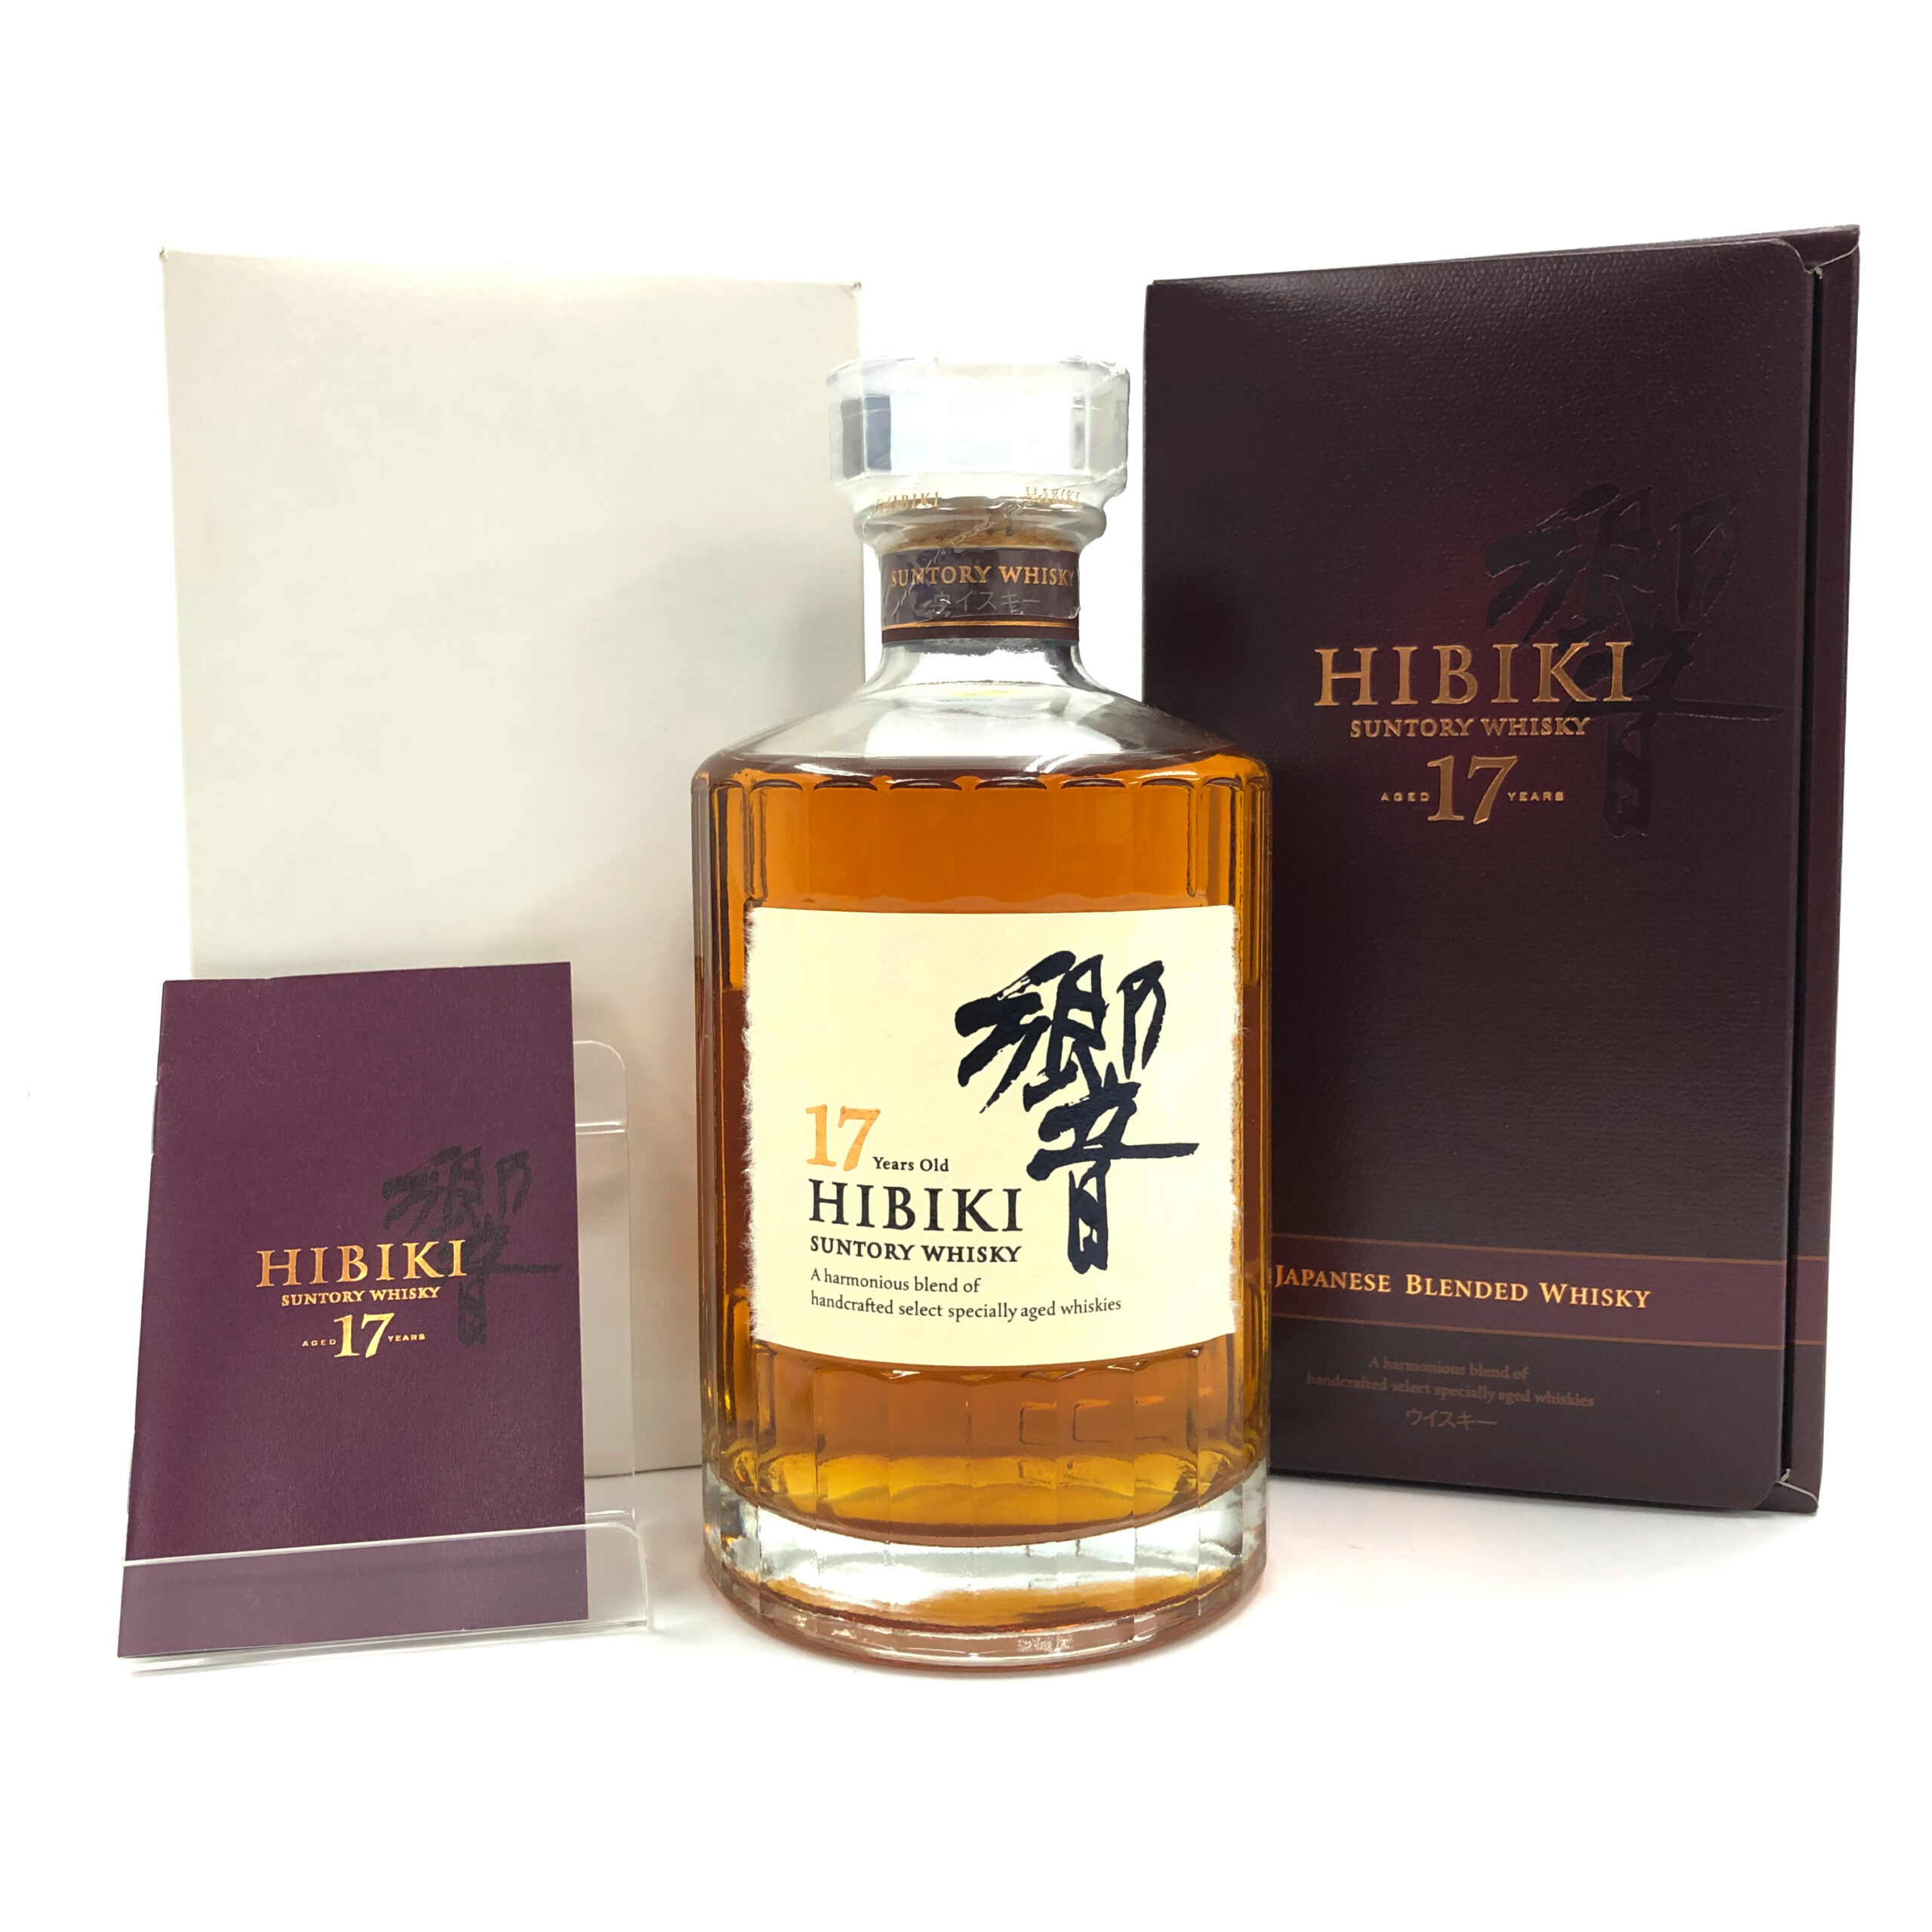 【Suntory Hibiki series.】「Hibiki 17year.」Launched in 1989 to commemorate Suntory's 90th anniversary. Second generation master blender Keizo Saji pursued the highest taste of this range with the aim of creating "a Japanese whisky worthy of being called the best of whisky".